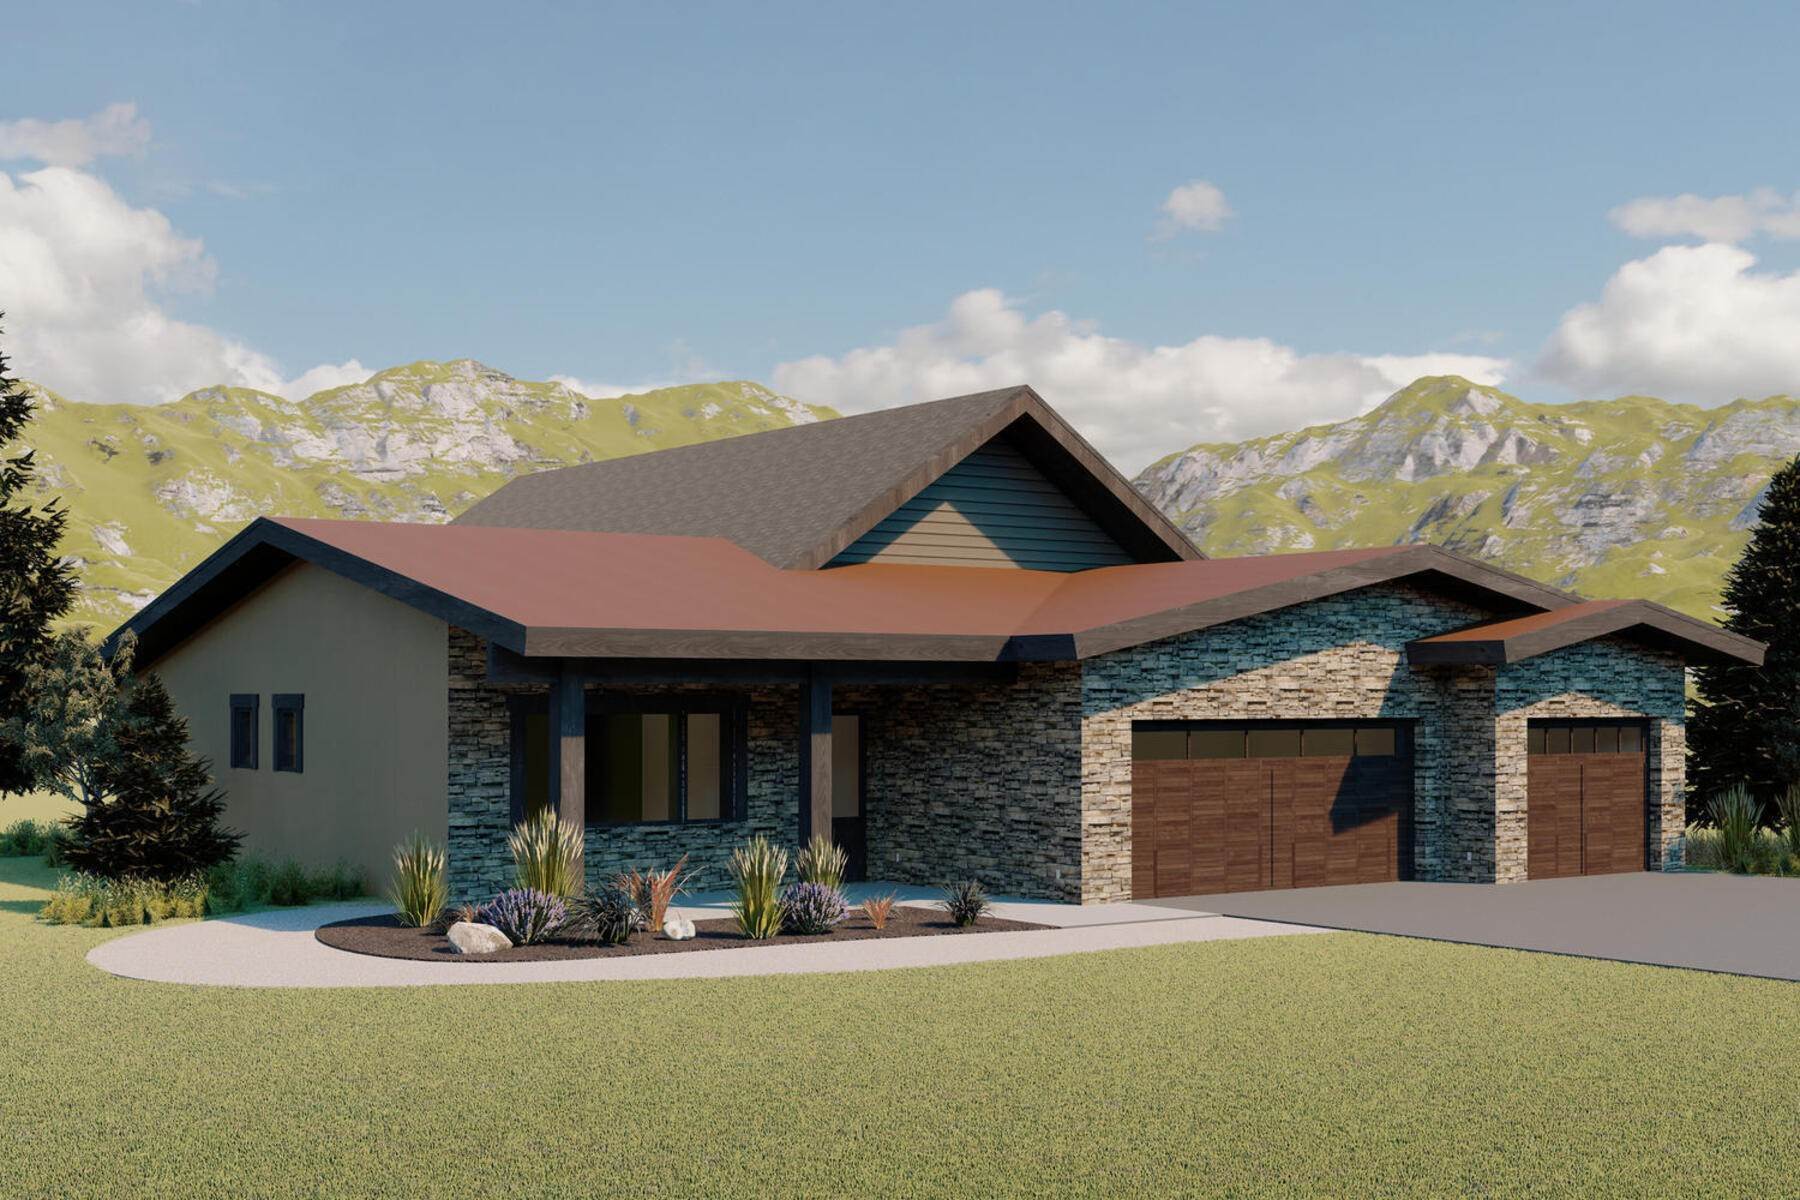 2. Single Family Homes for Sale at New Construction Willow Floor Plan at High Star Ranch 539 Thorn View Court, Lot 4 Kamas, Utah 84036 United States